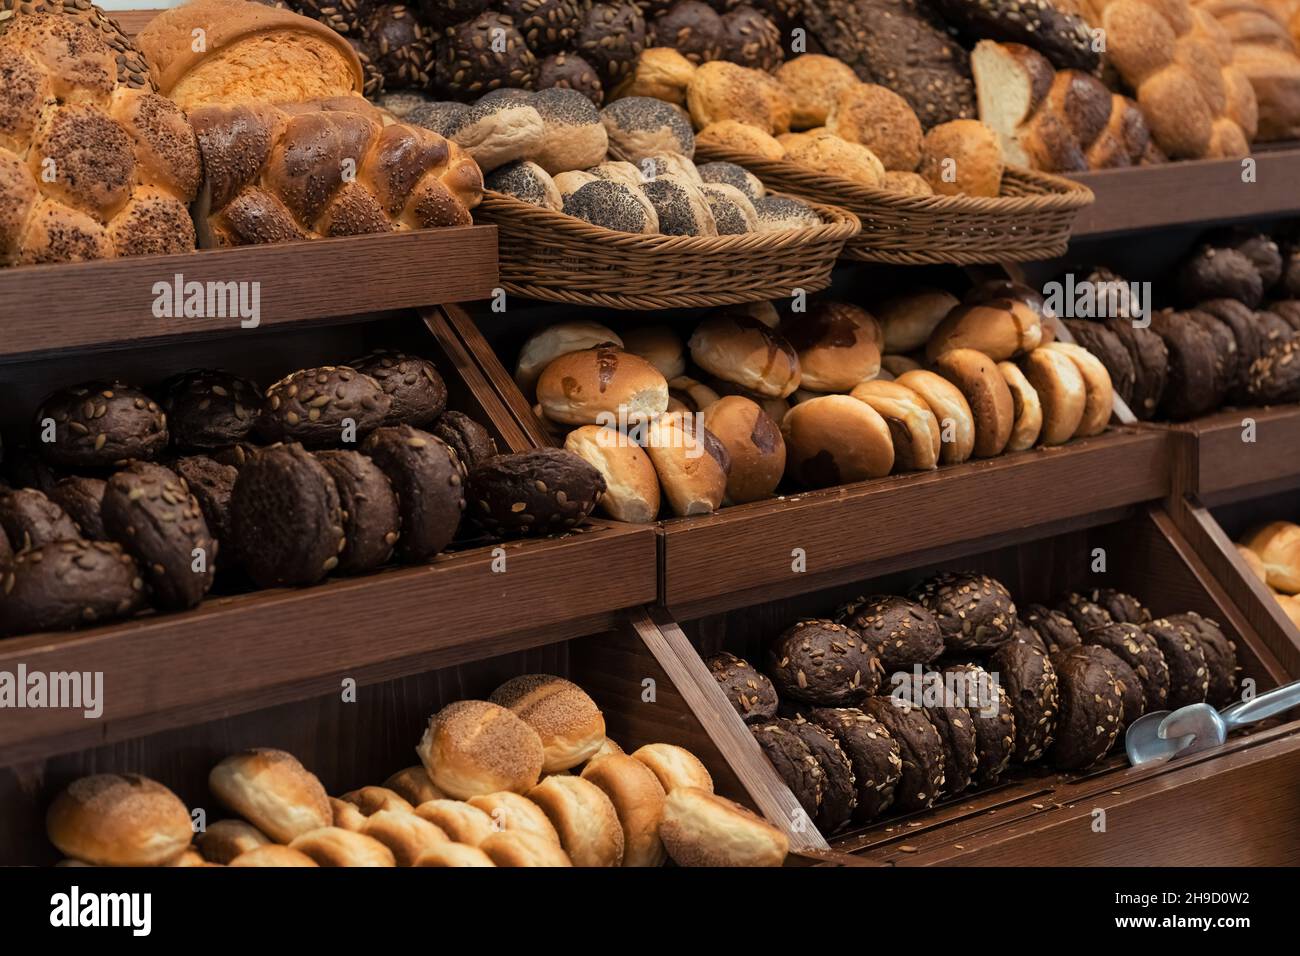 Breakfast lines of zopf or züpfe bread with sesames,  rye buns with sunflower seeds and white wheat buns with poppy seeds in wooden trays at the hotel Stock Photo